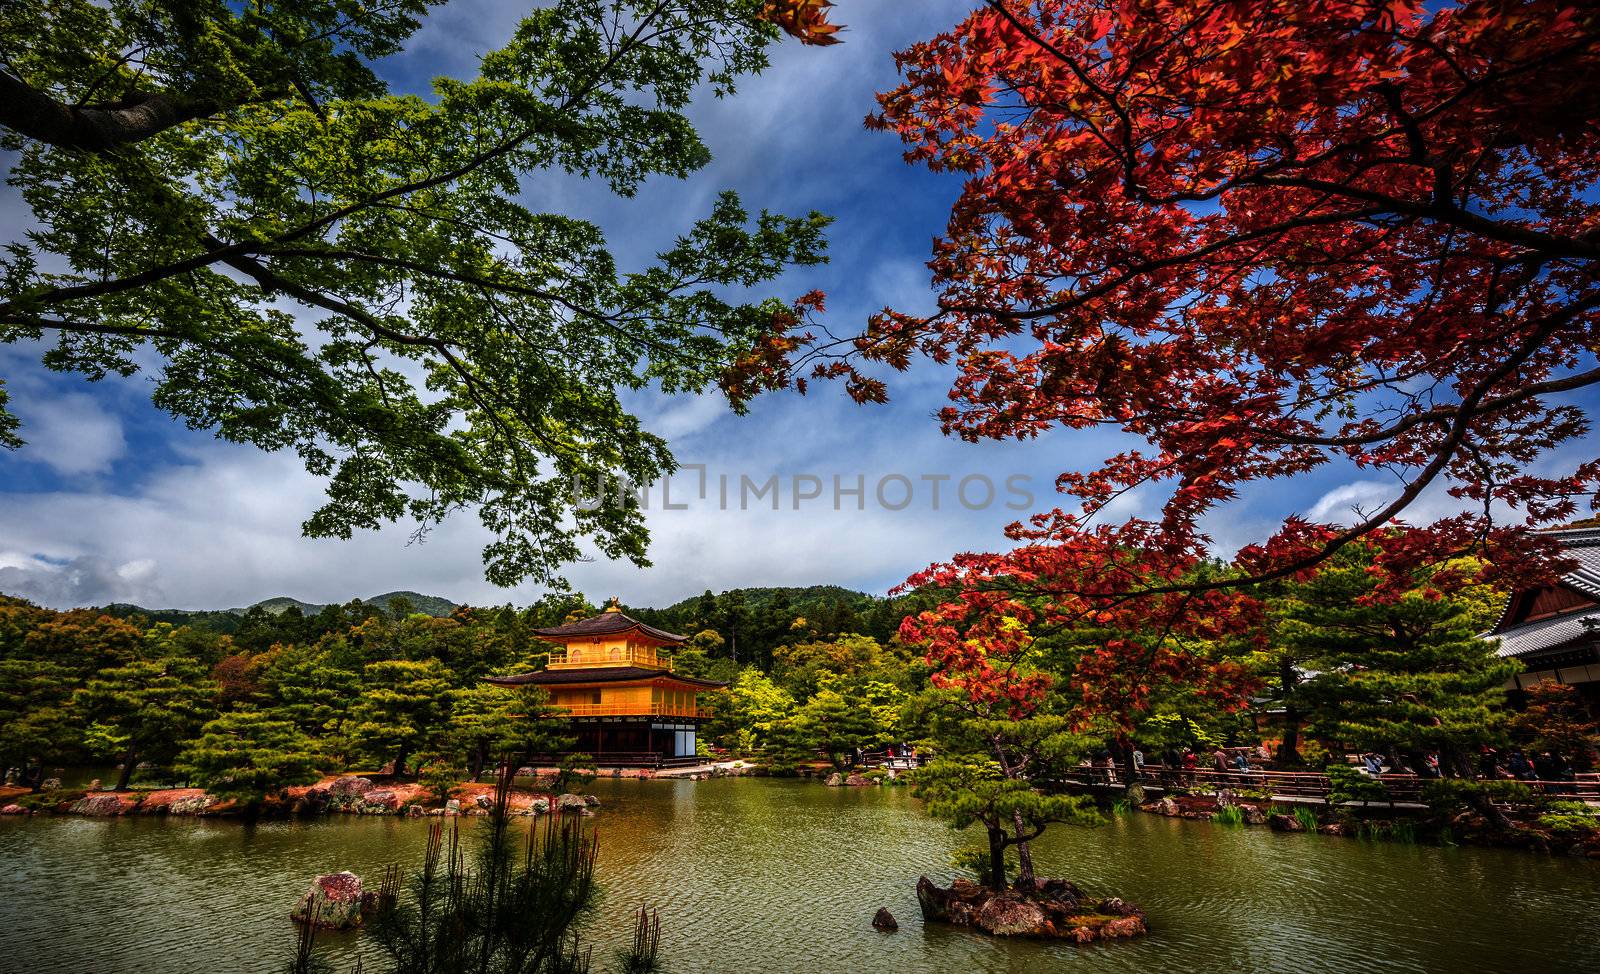 Kinkakuji Temple (The Golden Pavilion) in Kyoto, Japan  by inarts